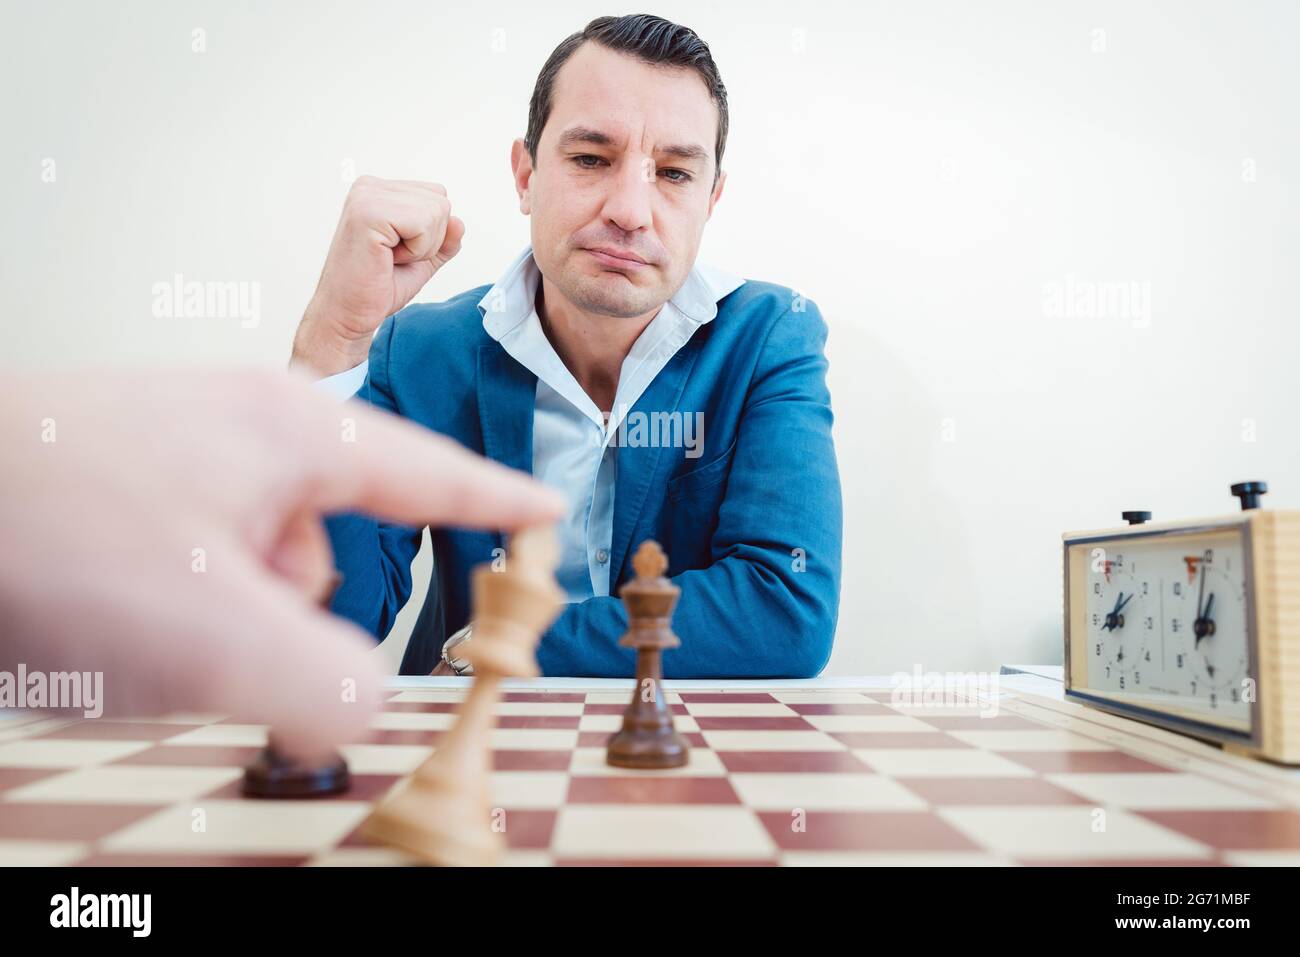 man setting woman checkmate, she is accepting defeat Stock Photo